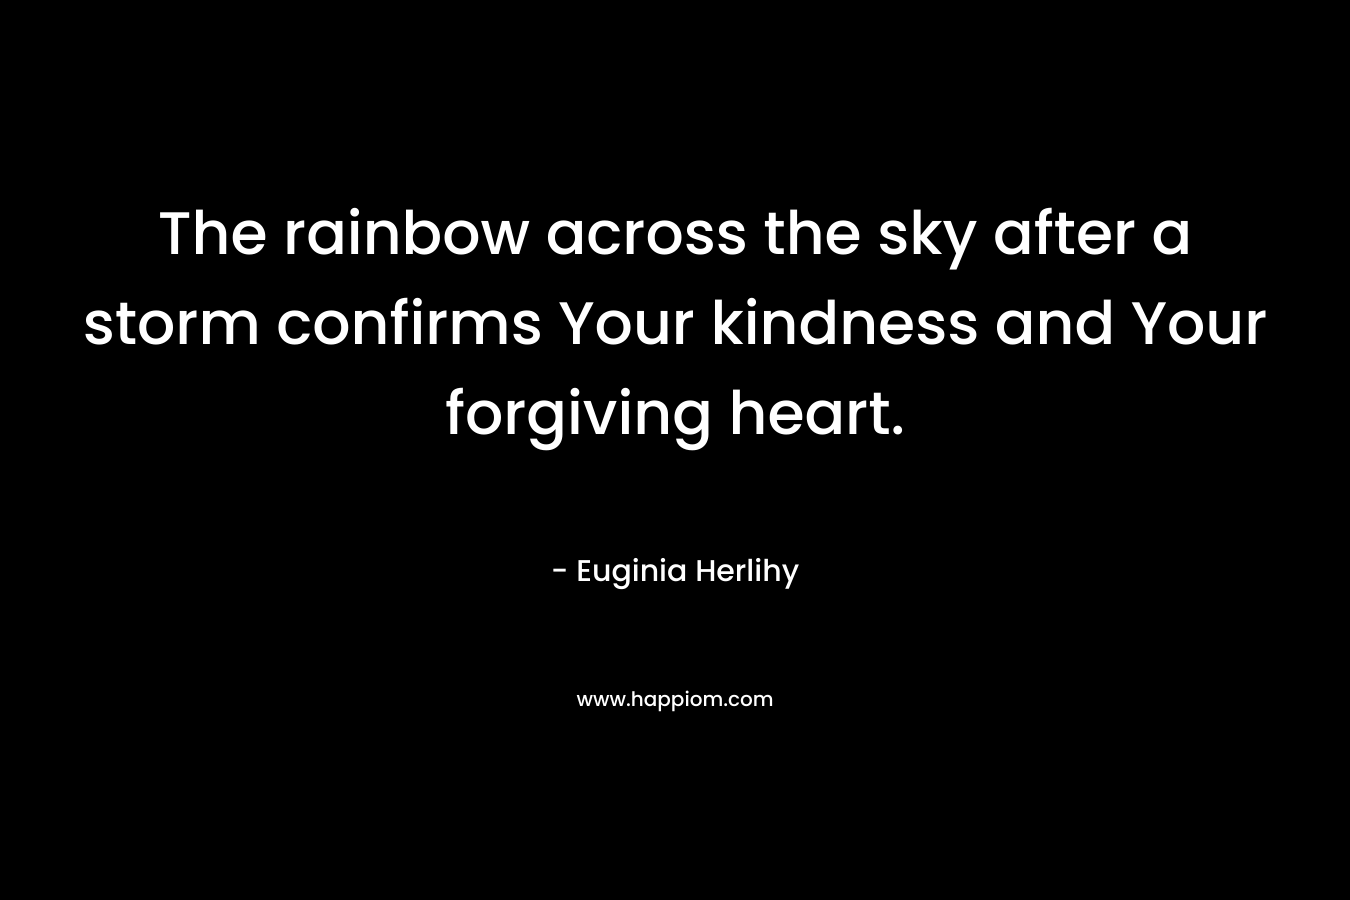 The rainbow across the sky after a storm confirms Your kindness and Your forgiving heart. – Euginia Herlihy